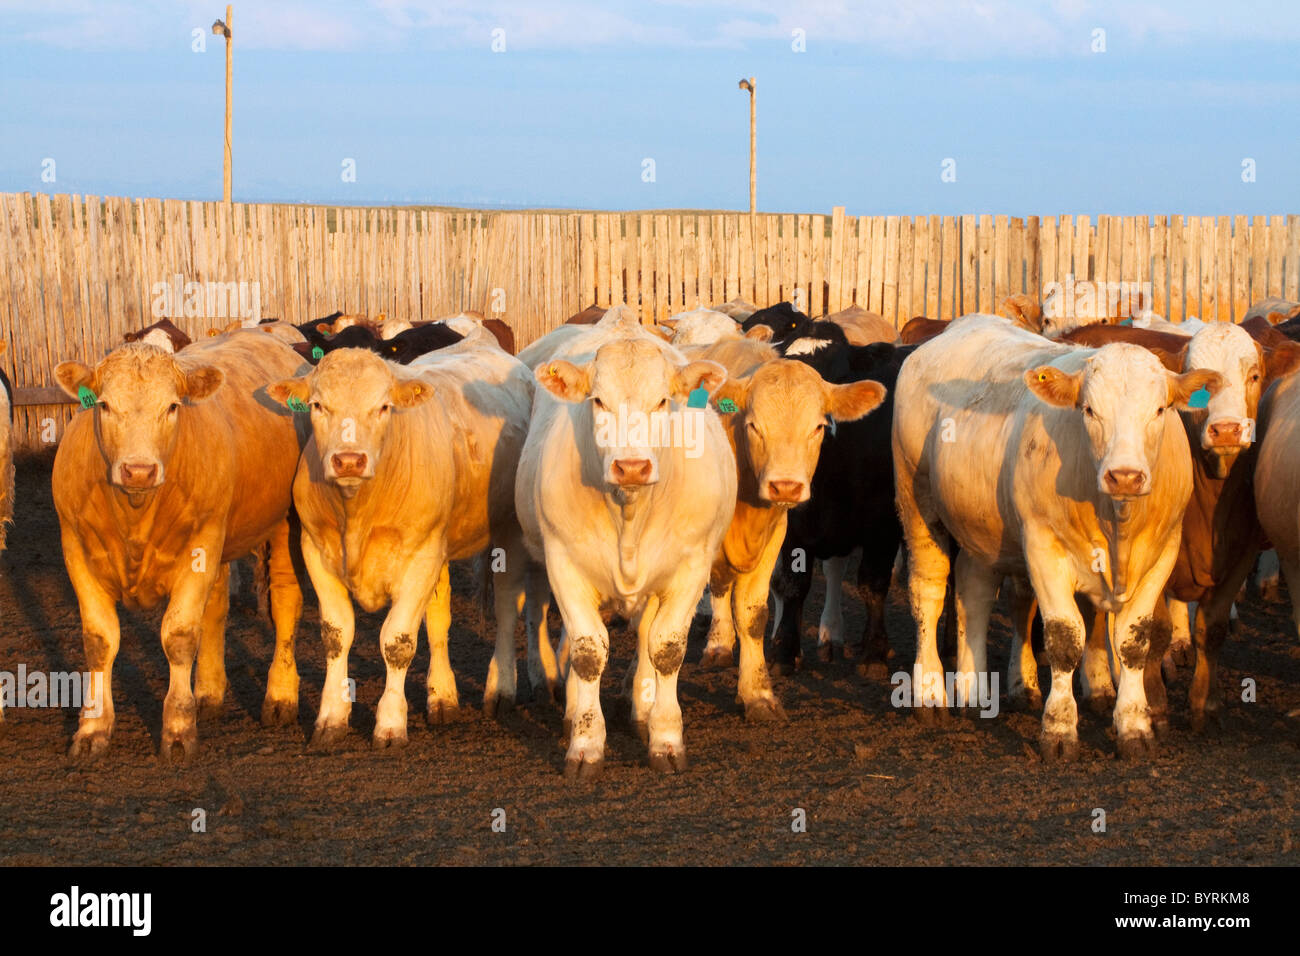 Livestock - Crossbred beef cattle in a feedlot pen at sunset / Alberta, Canada. Stock Photo